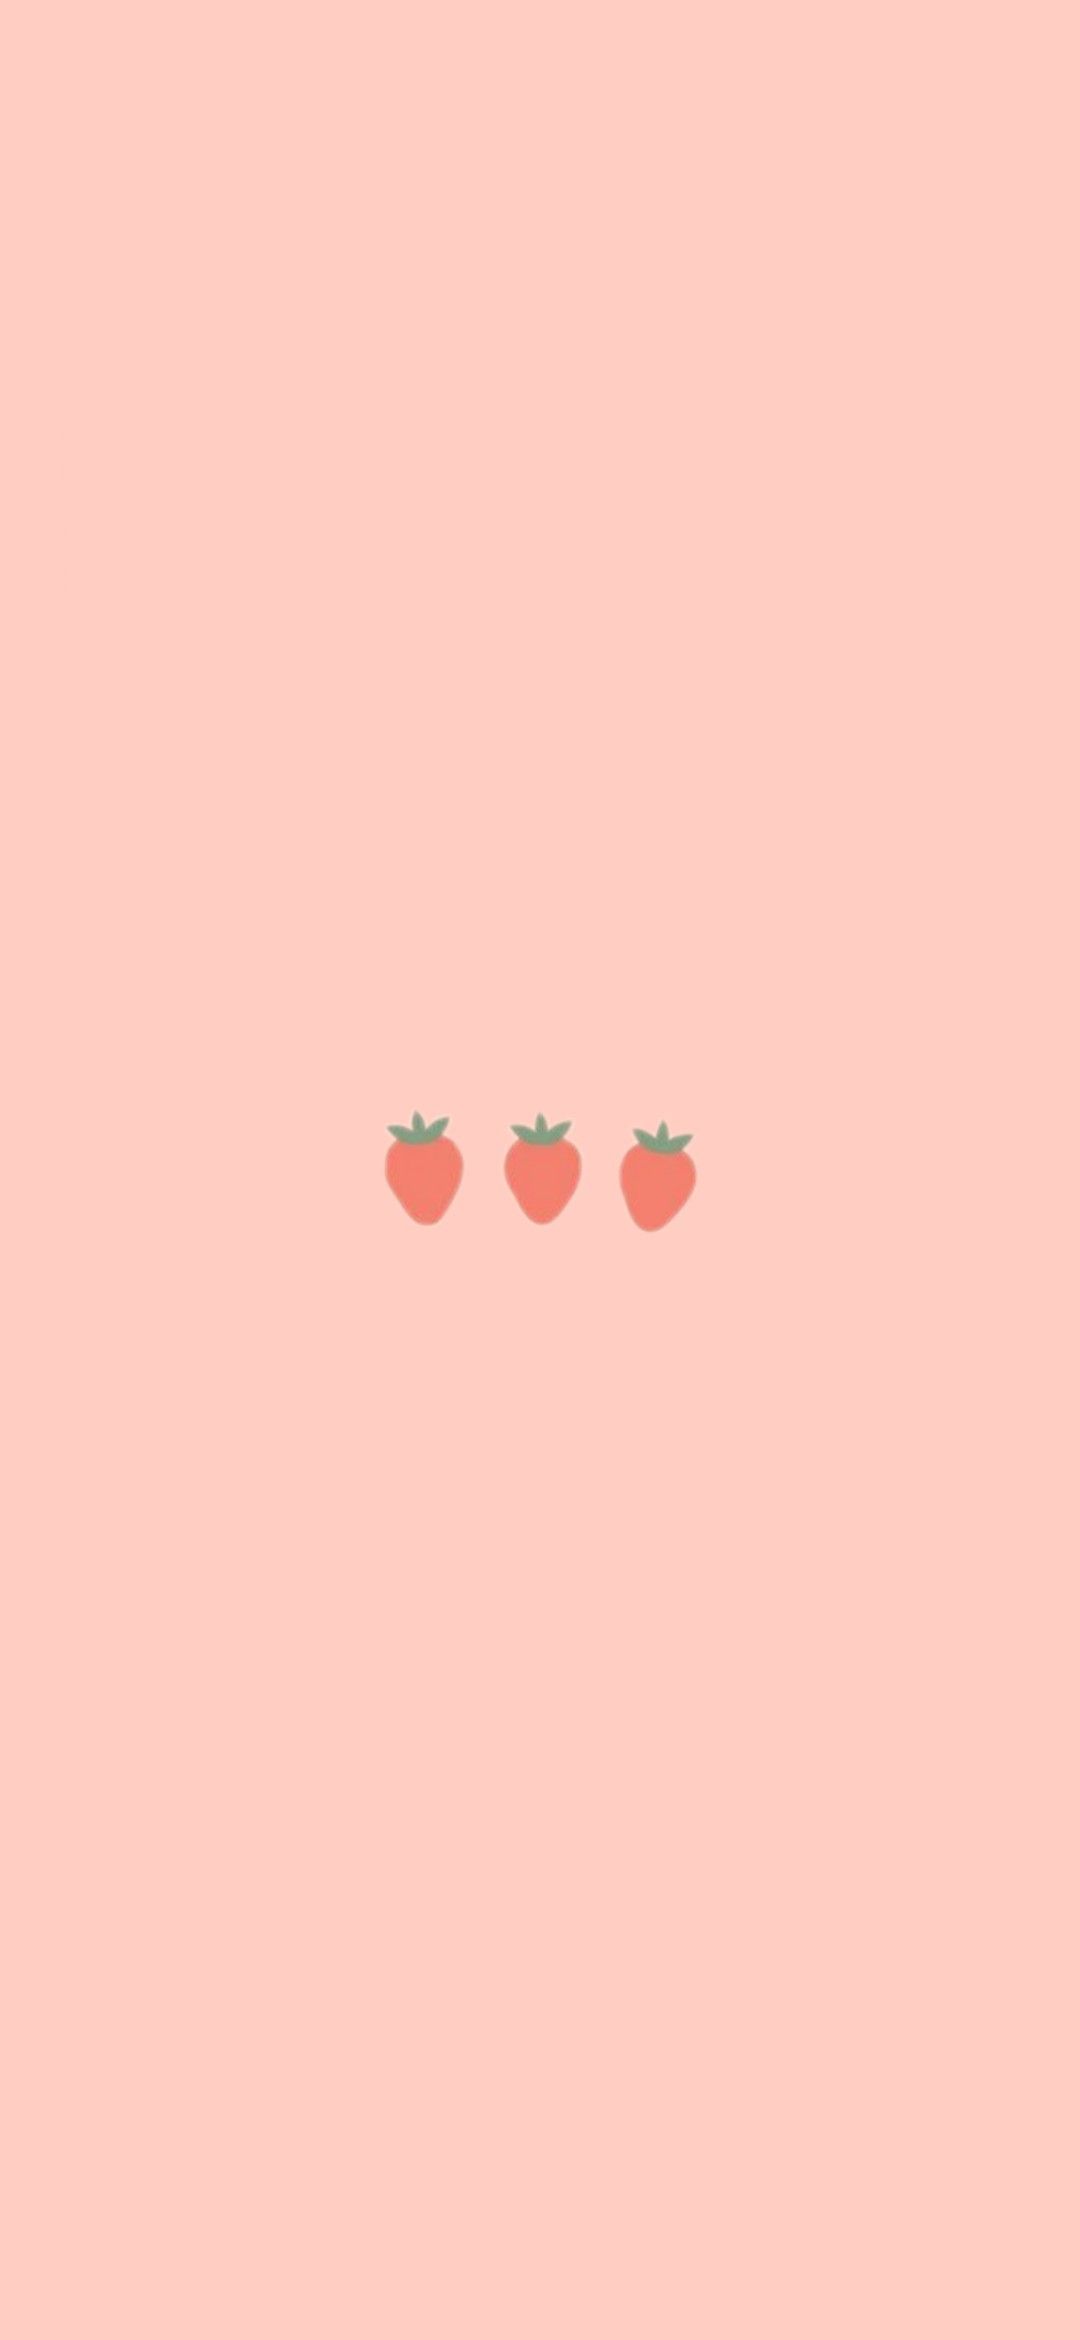 Strawberry Milk Aesthetic Wallpapers Wallpaper Cave See more ideas about pink aesthetic, strawberry milk, pastel aesthetic. strawberry milk aesthetic wallpapers